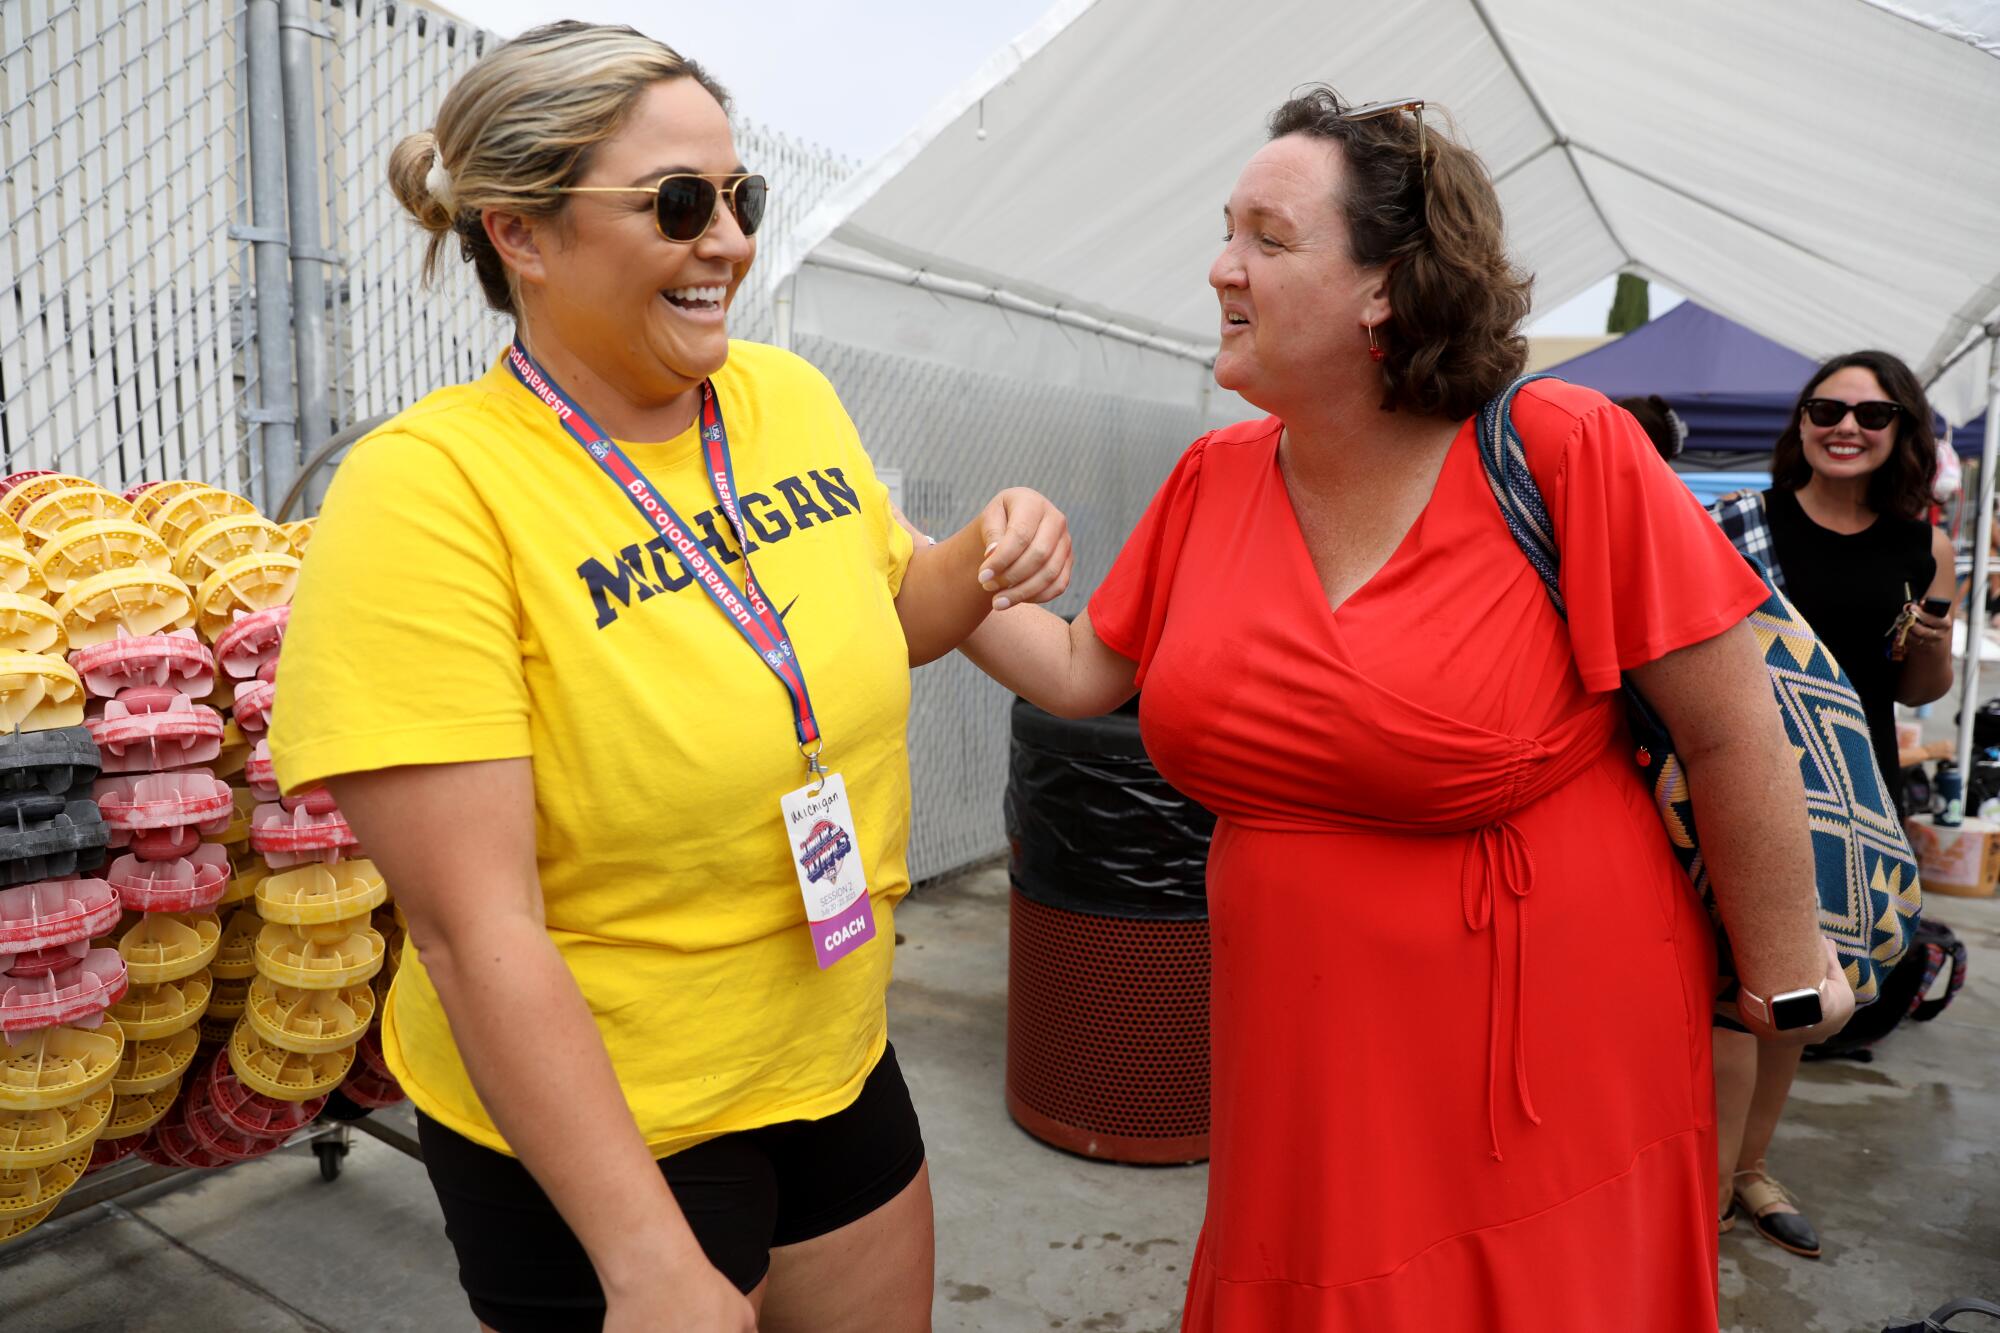 Katie Porter speaking with a woman wearing a shirt that reads, "Michigan"